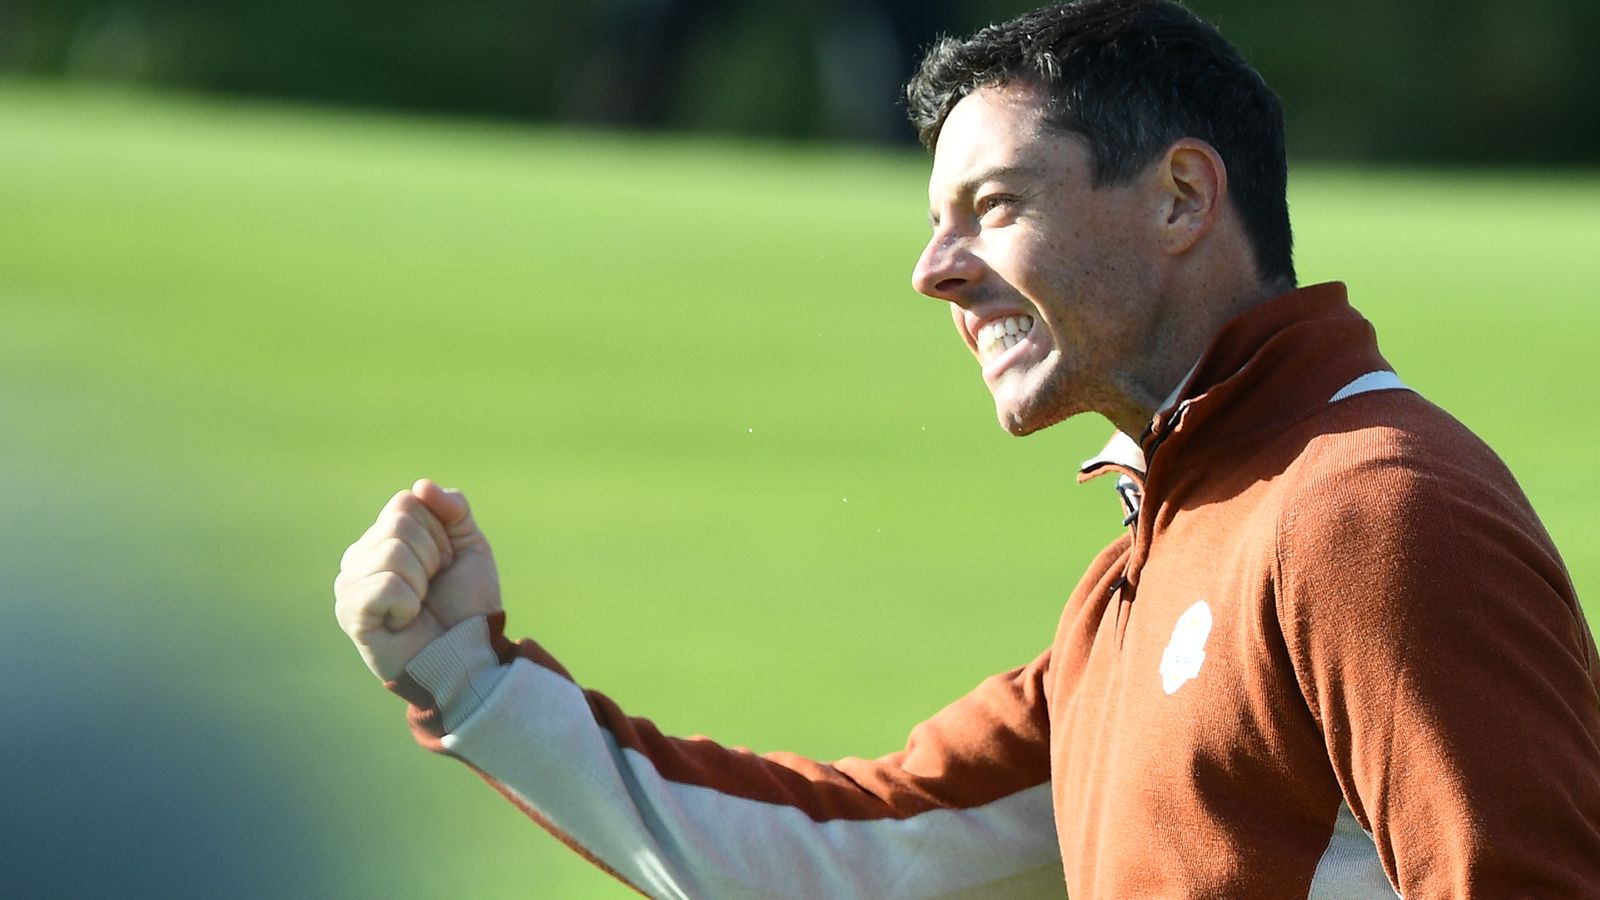 Ryder Cup 2018 Rory McIlroy to face Justin Thomas in Sunday singles